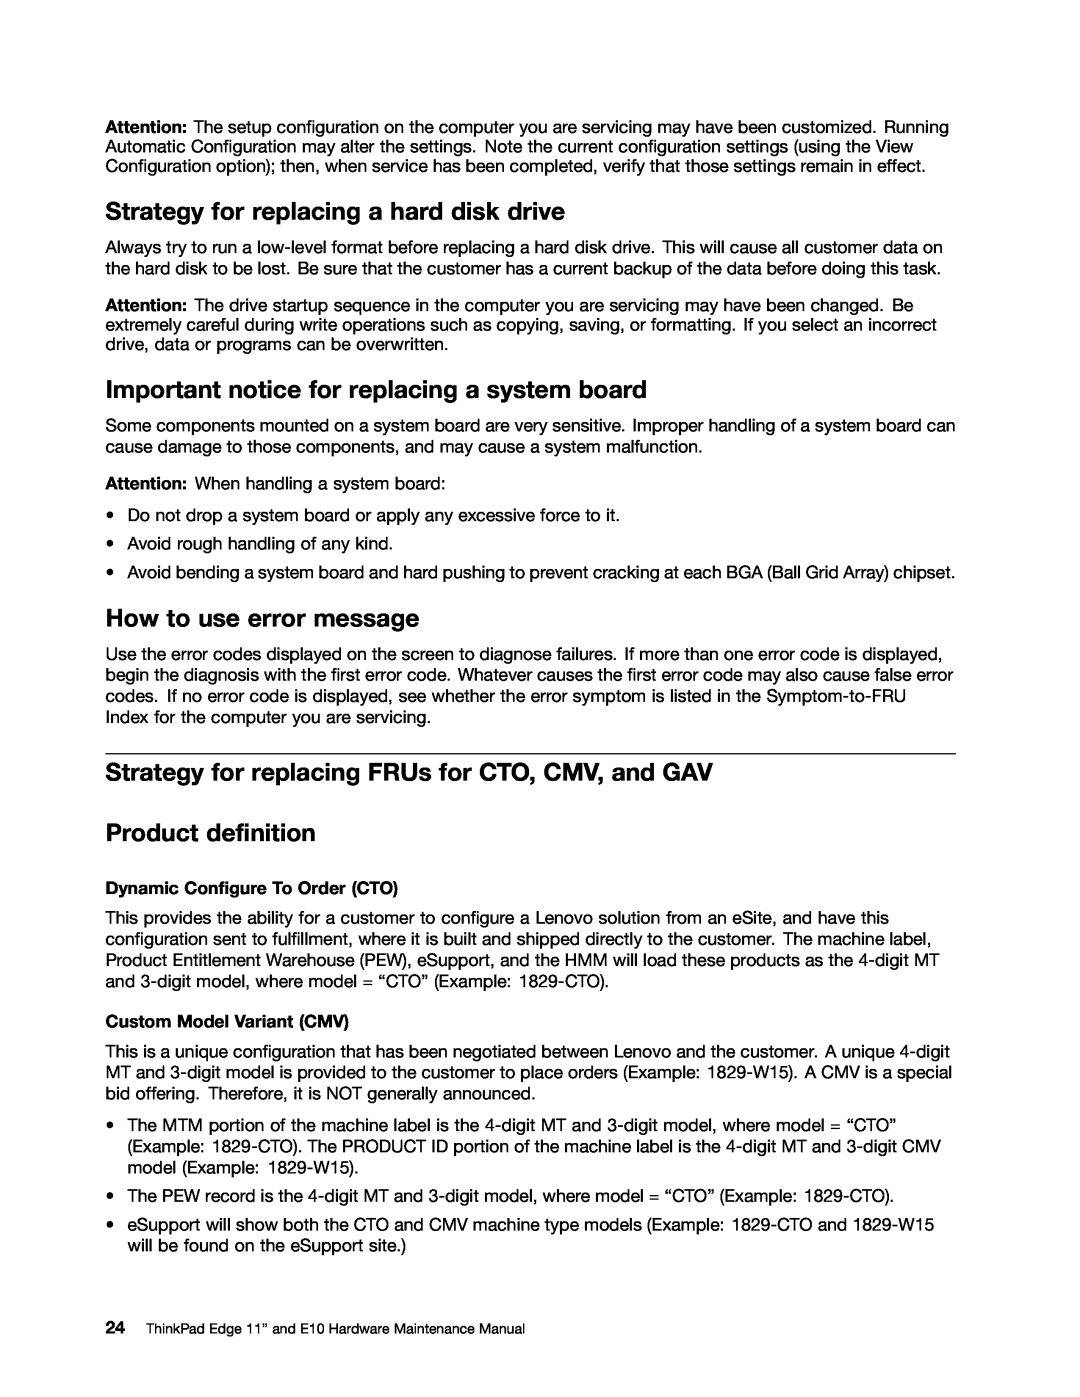 Lenovo E10 manual Strategy for replacing a hard disk drive, Important notice for replacing a system board 